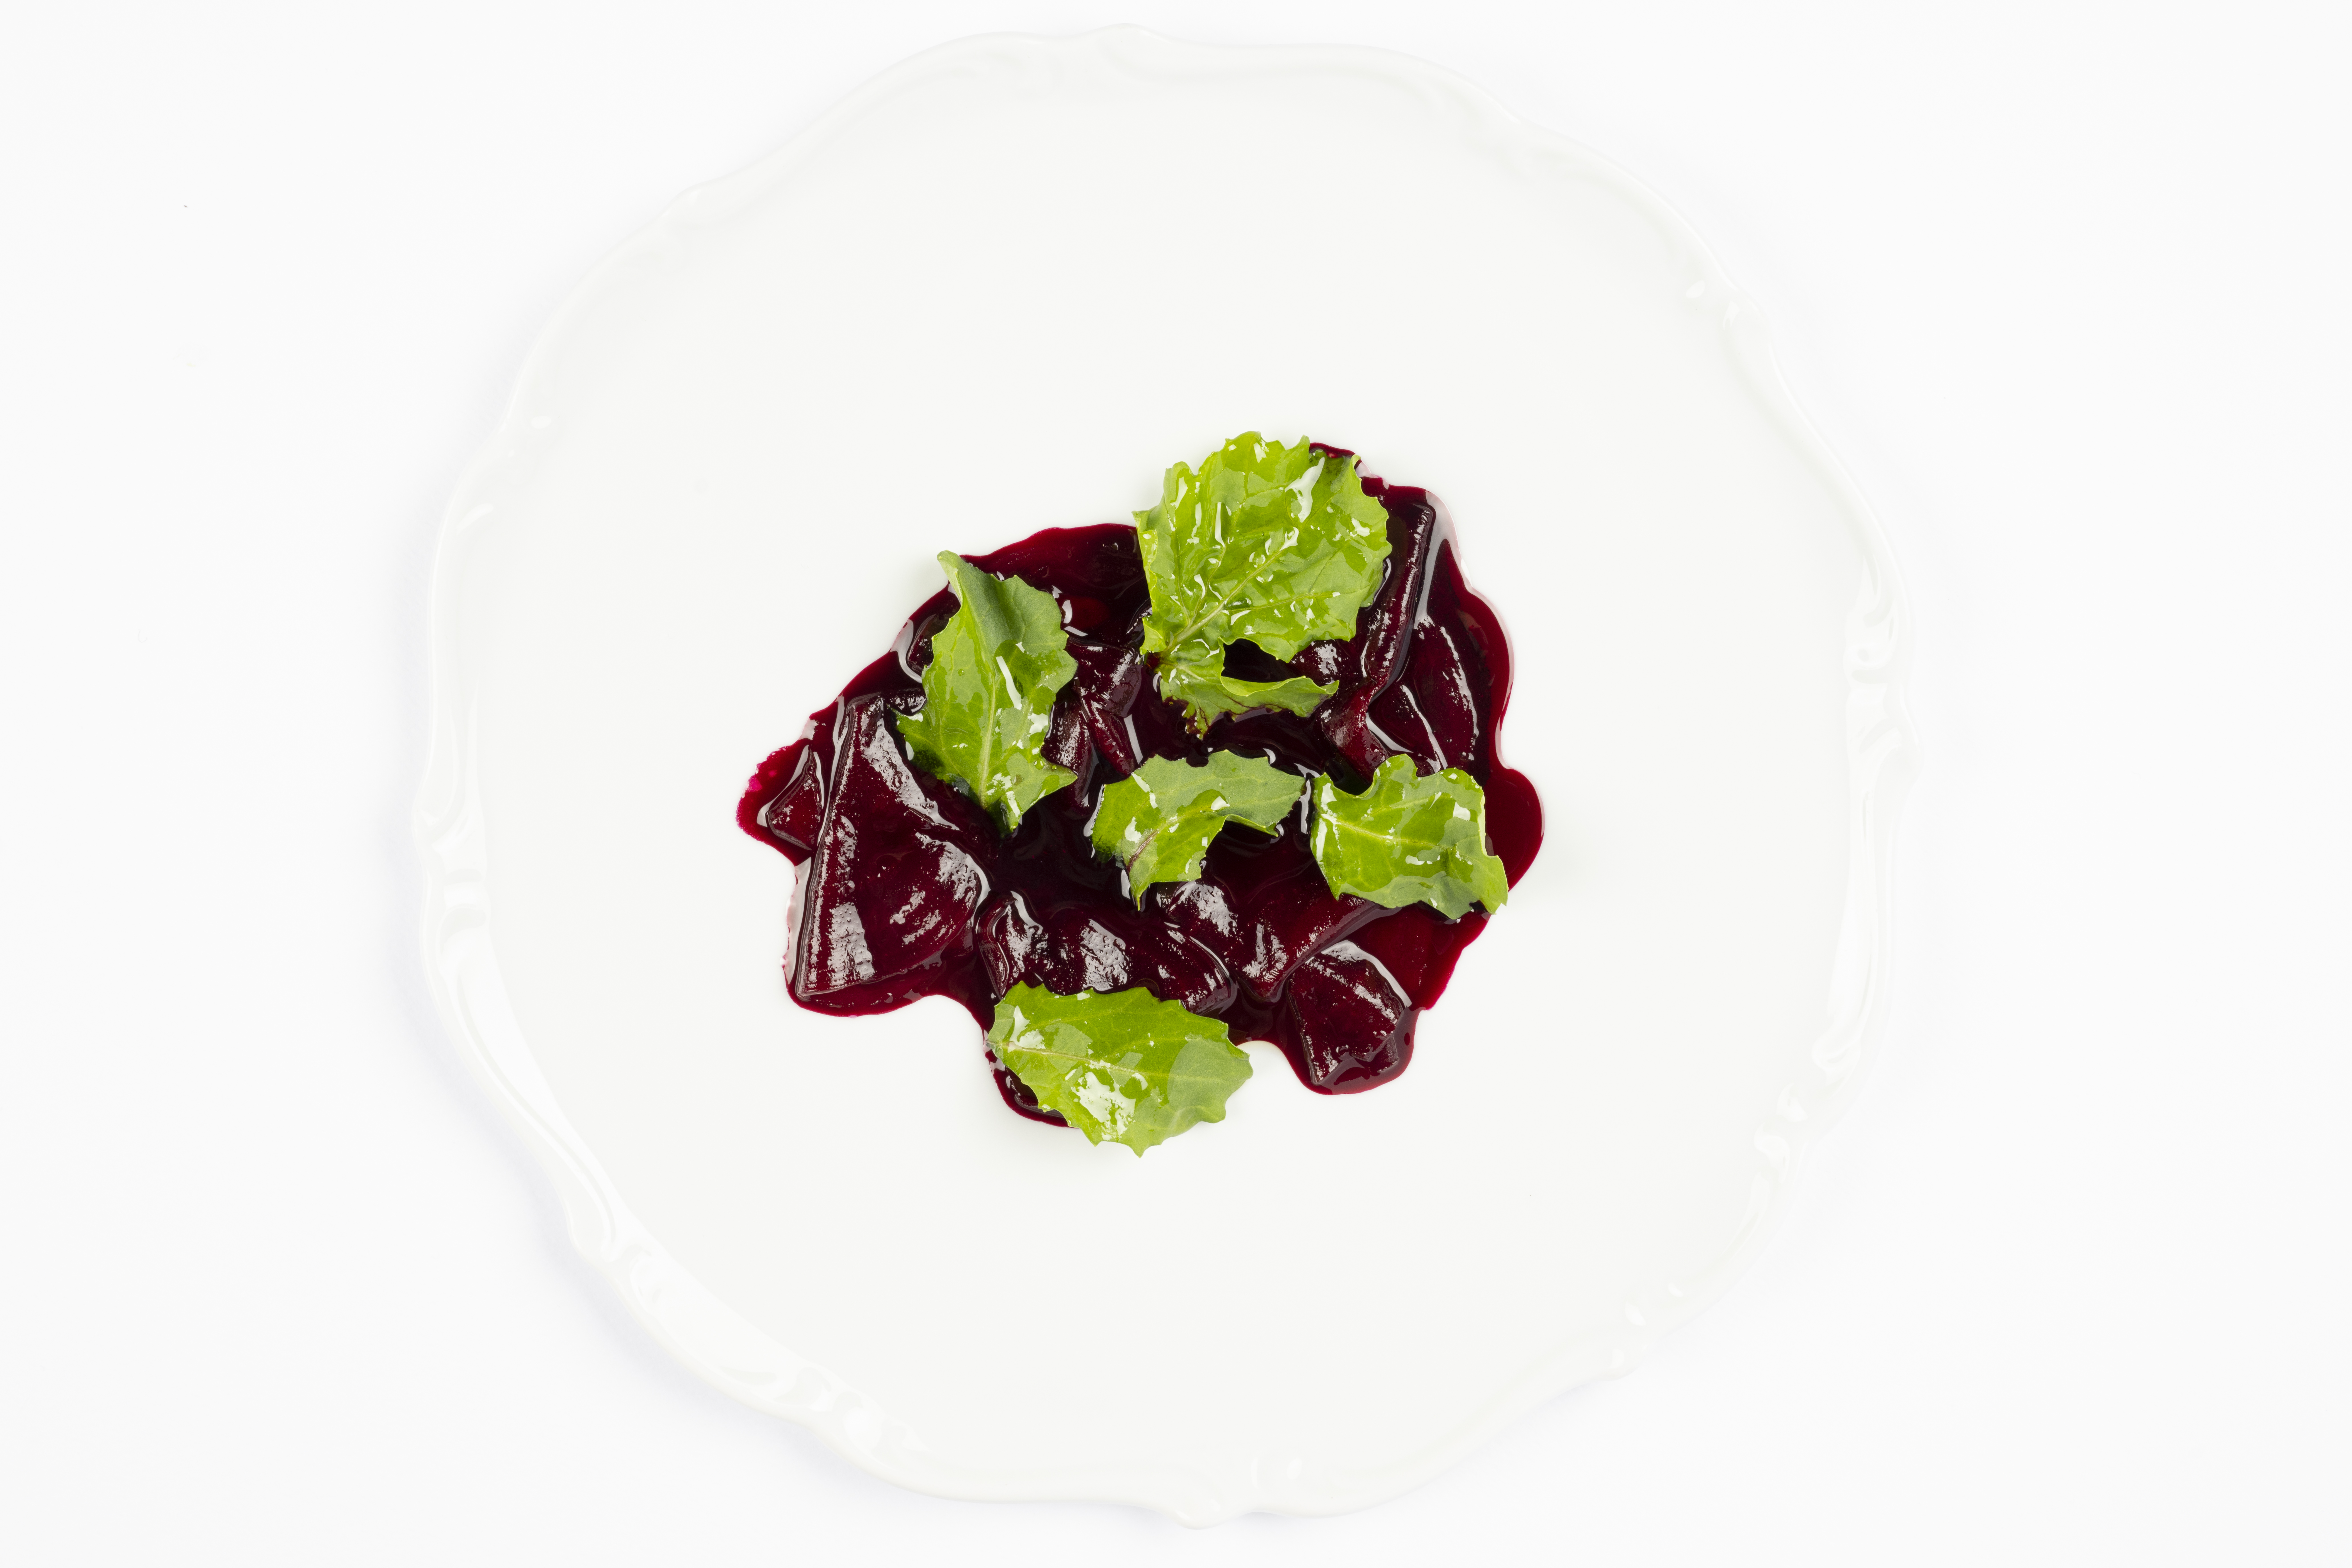 REALE Beetroot concord grapes and rocket salad credits Andrea Straccini